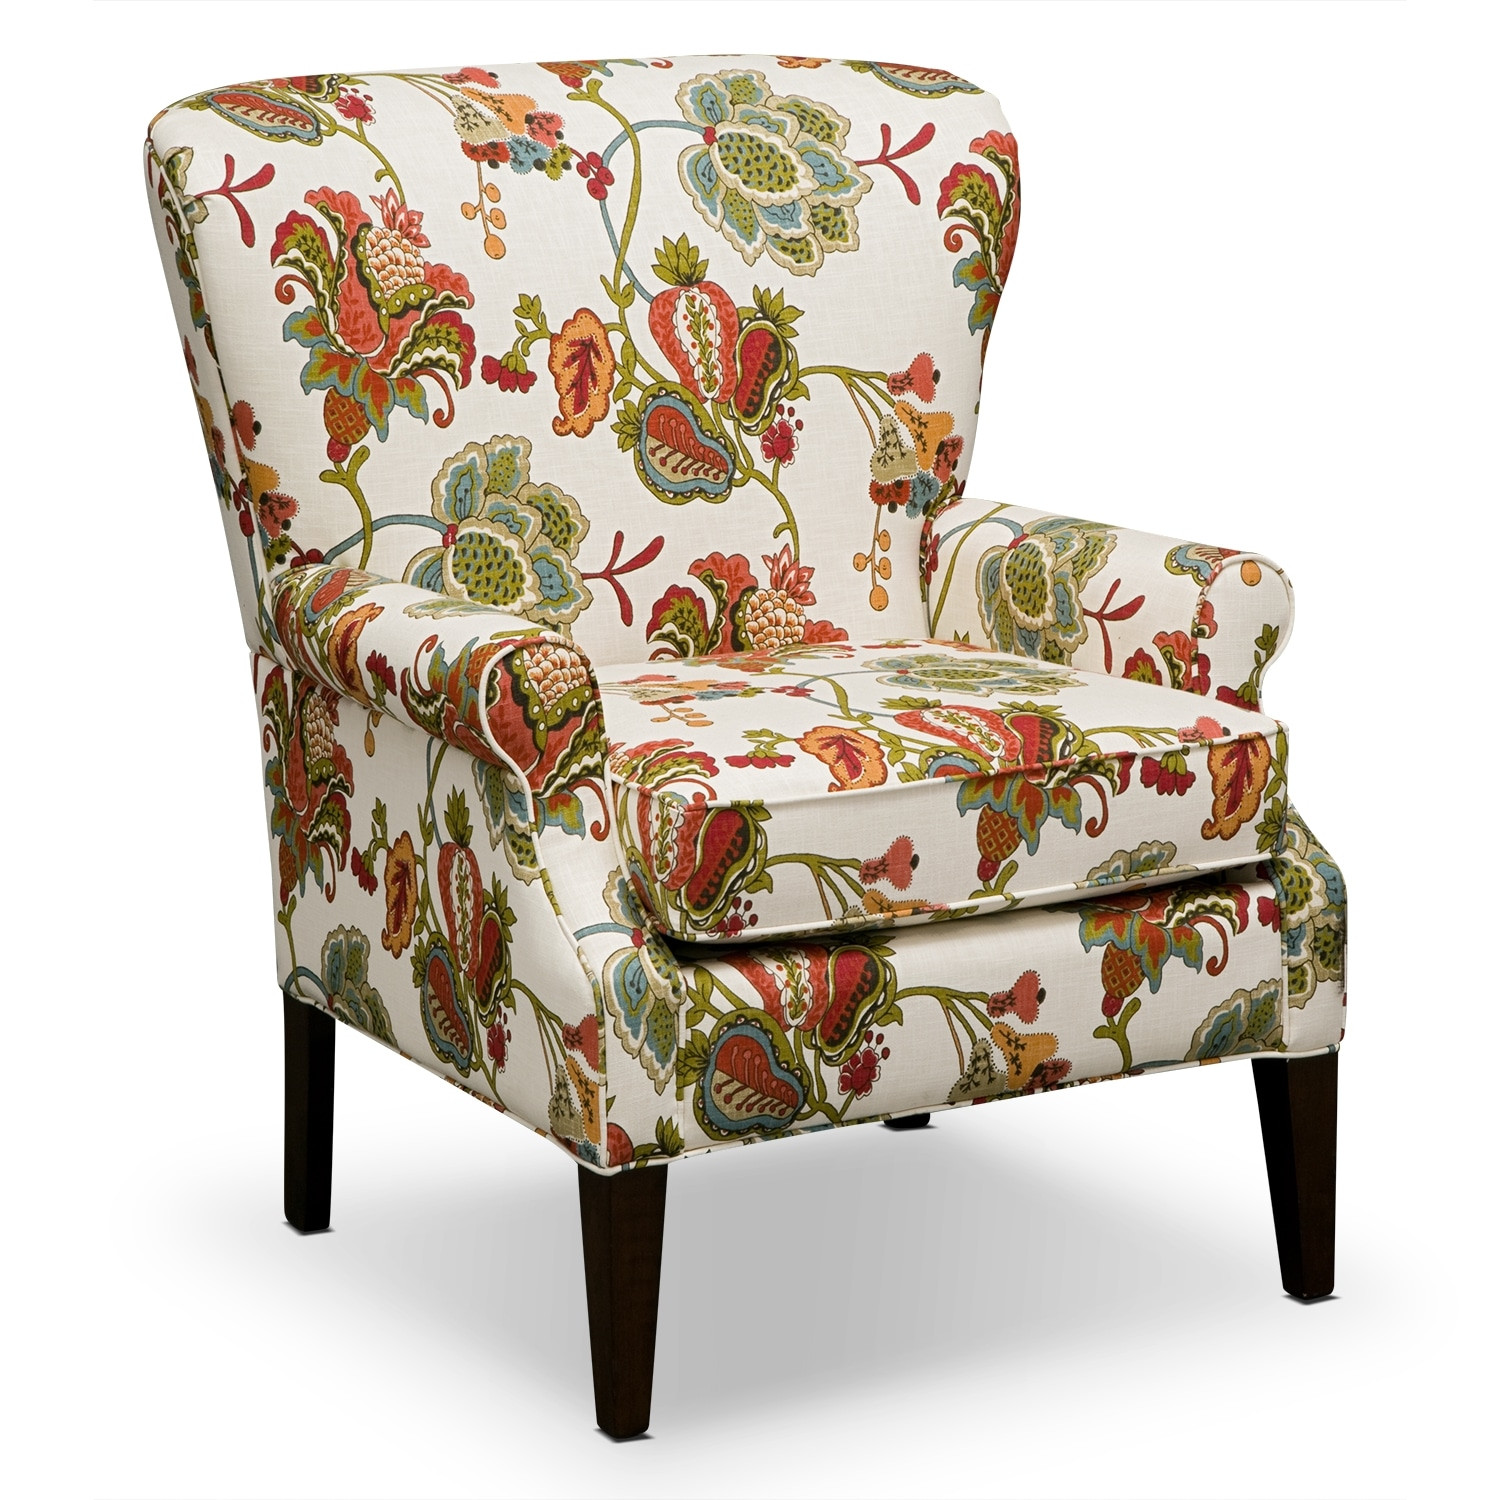 Value City Living Room Tables
 Charlotte Accent Chair